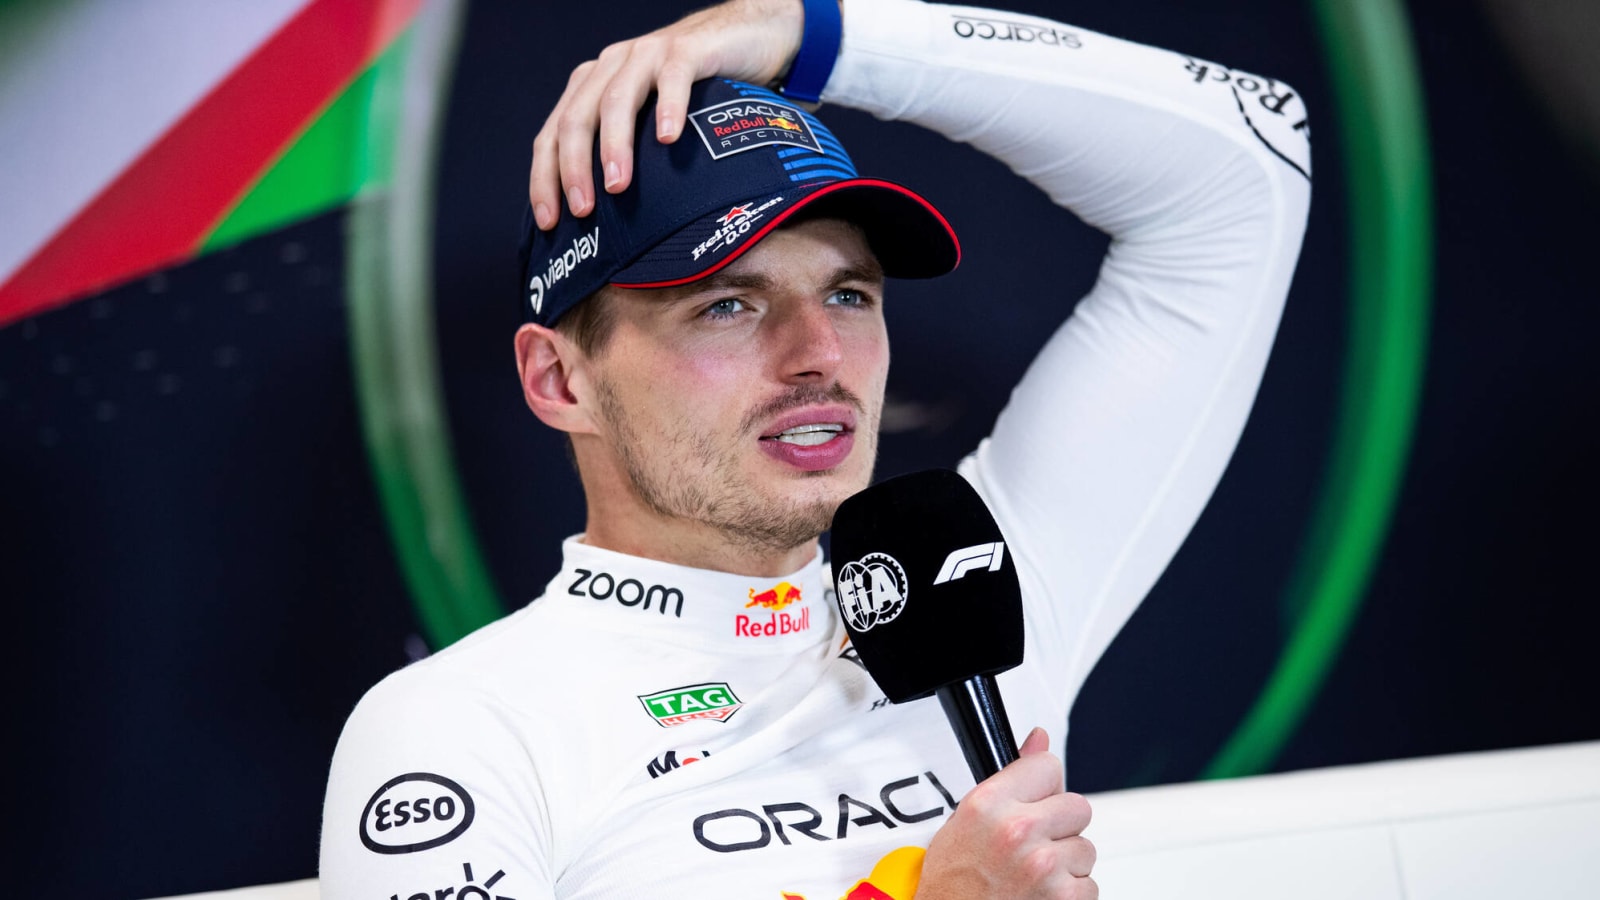 'Tickets or sustainability story?' Max Verstappen questions Formula 1’s commitment to sustainability over extensive travel